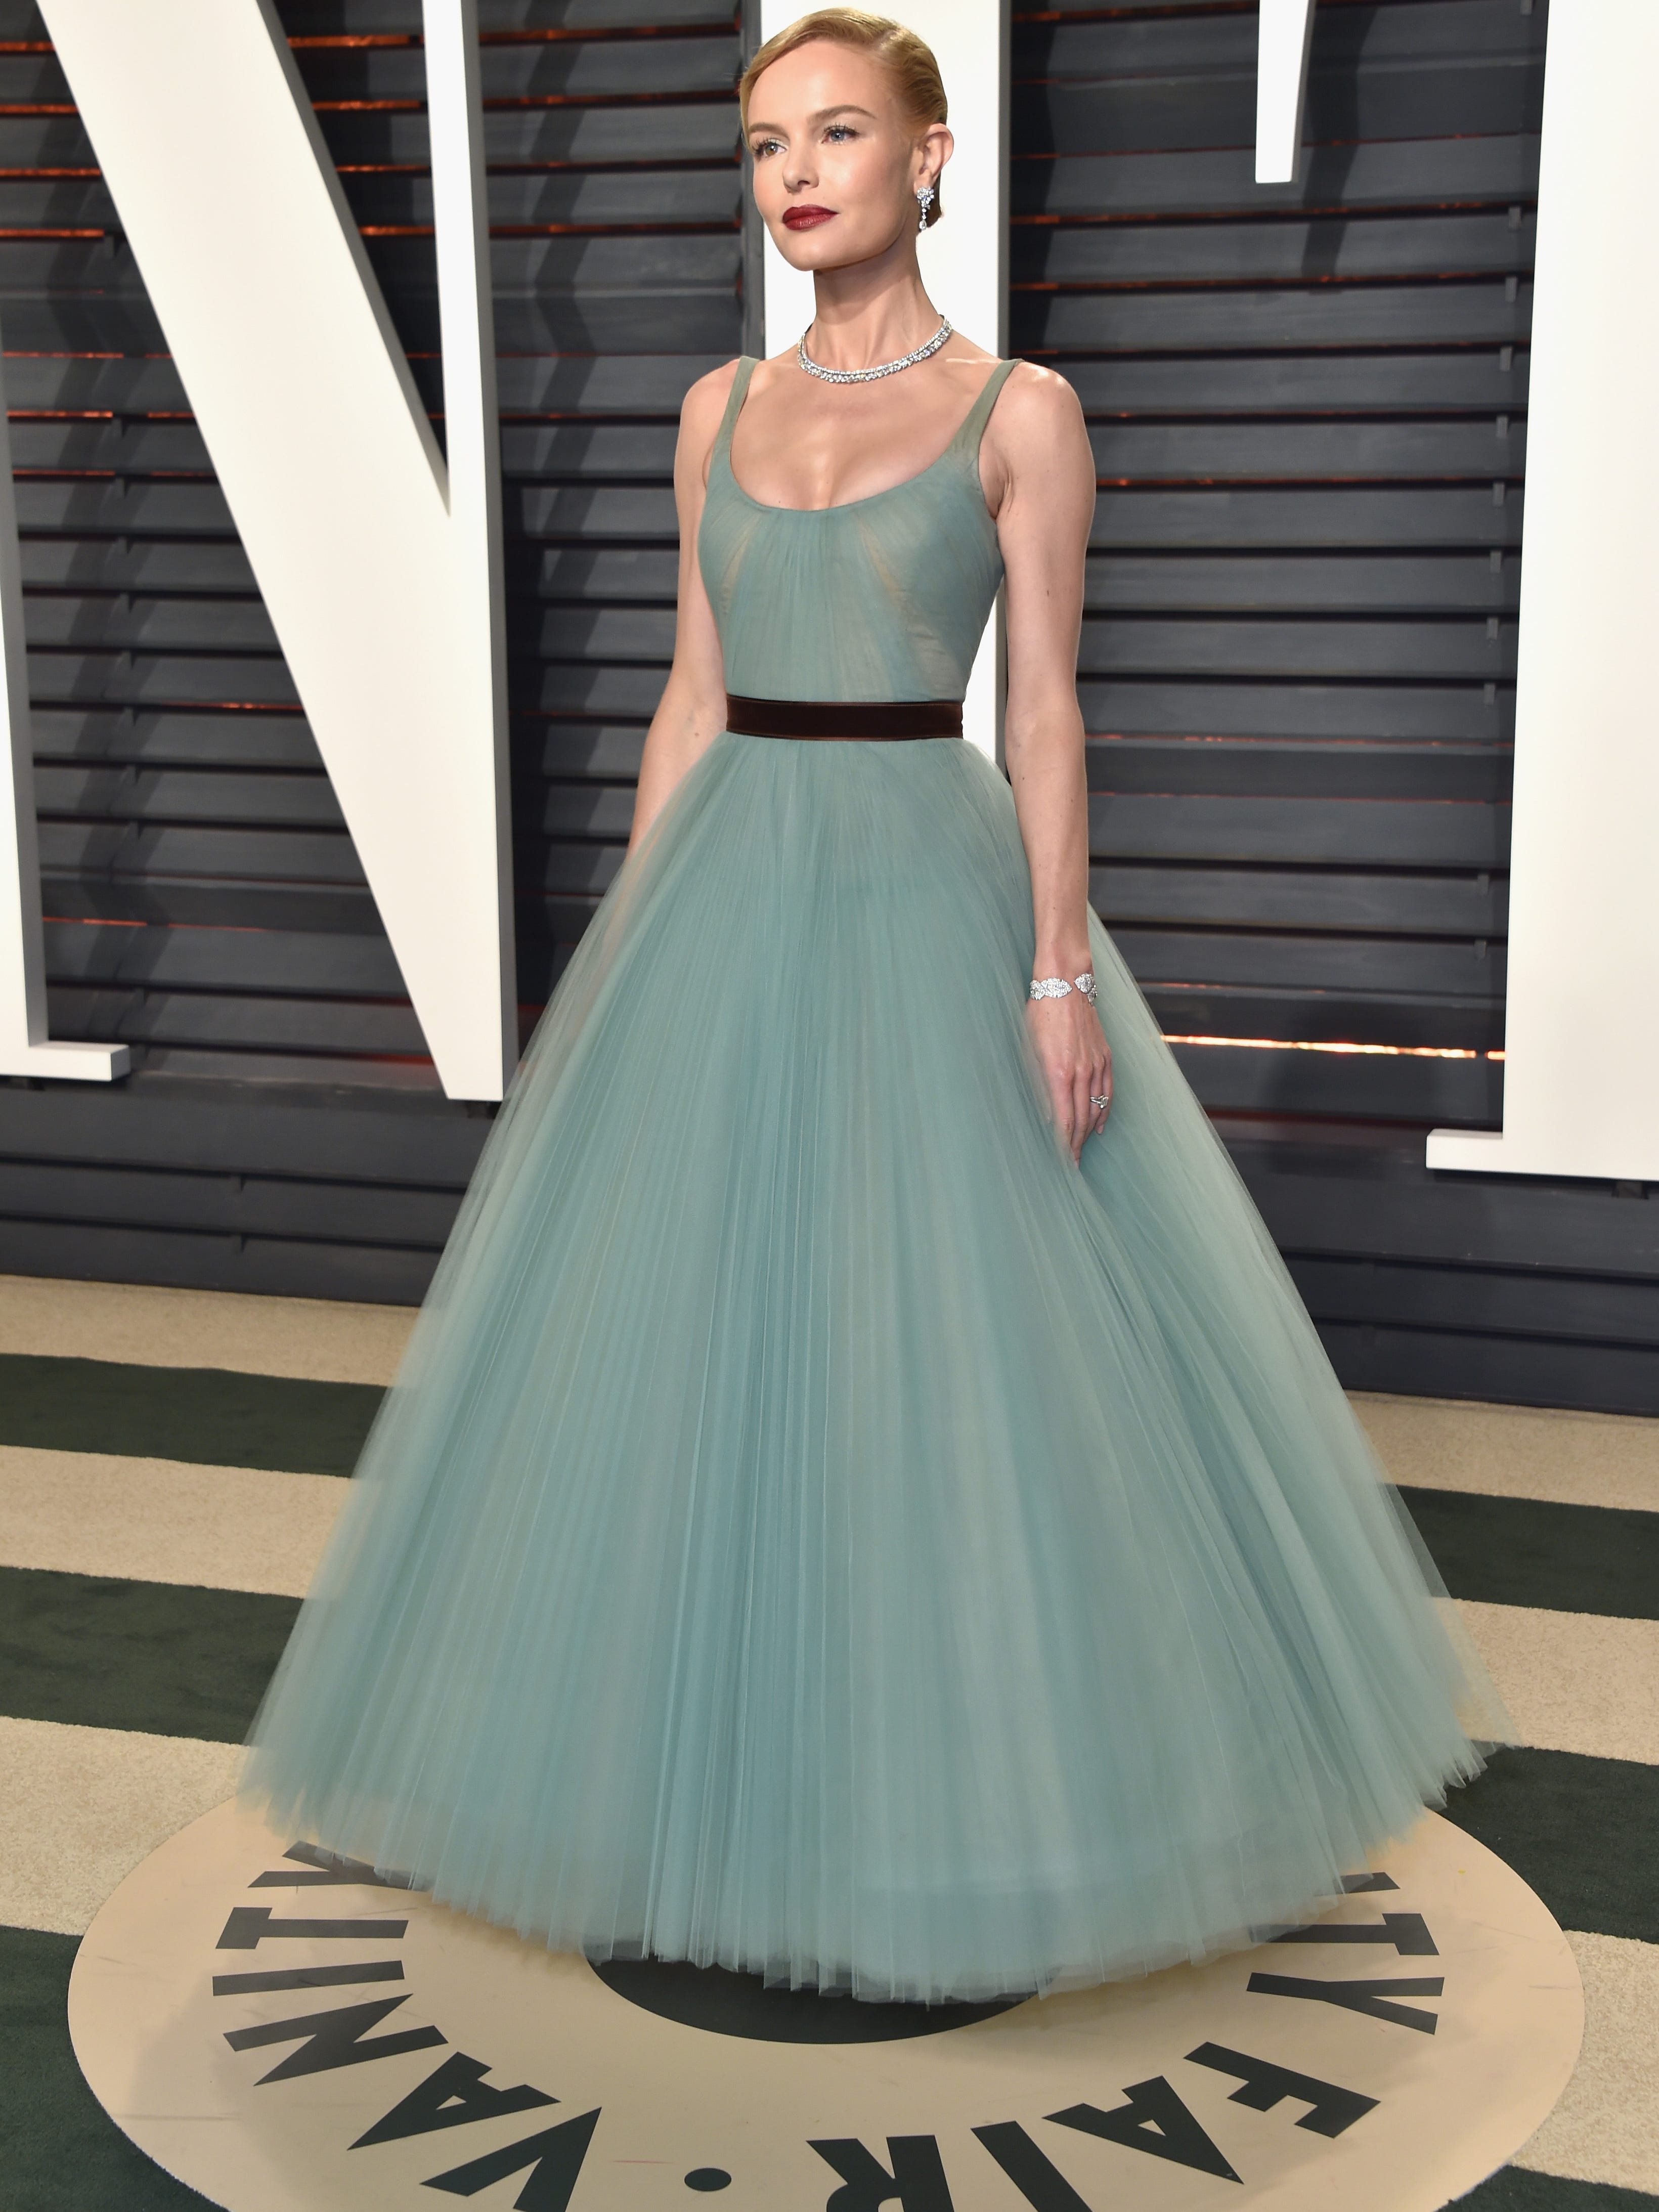 11 best-dressed stars from the Oscars after-parties